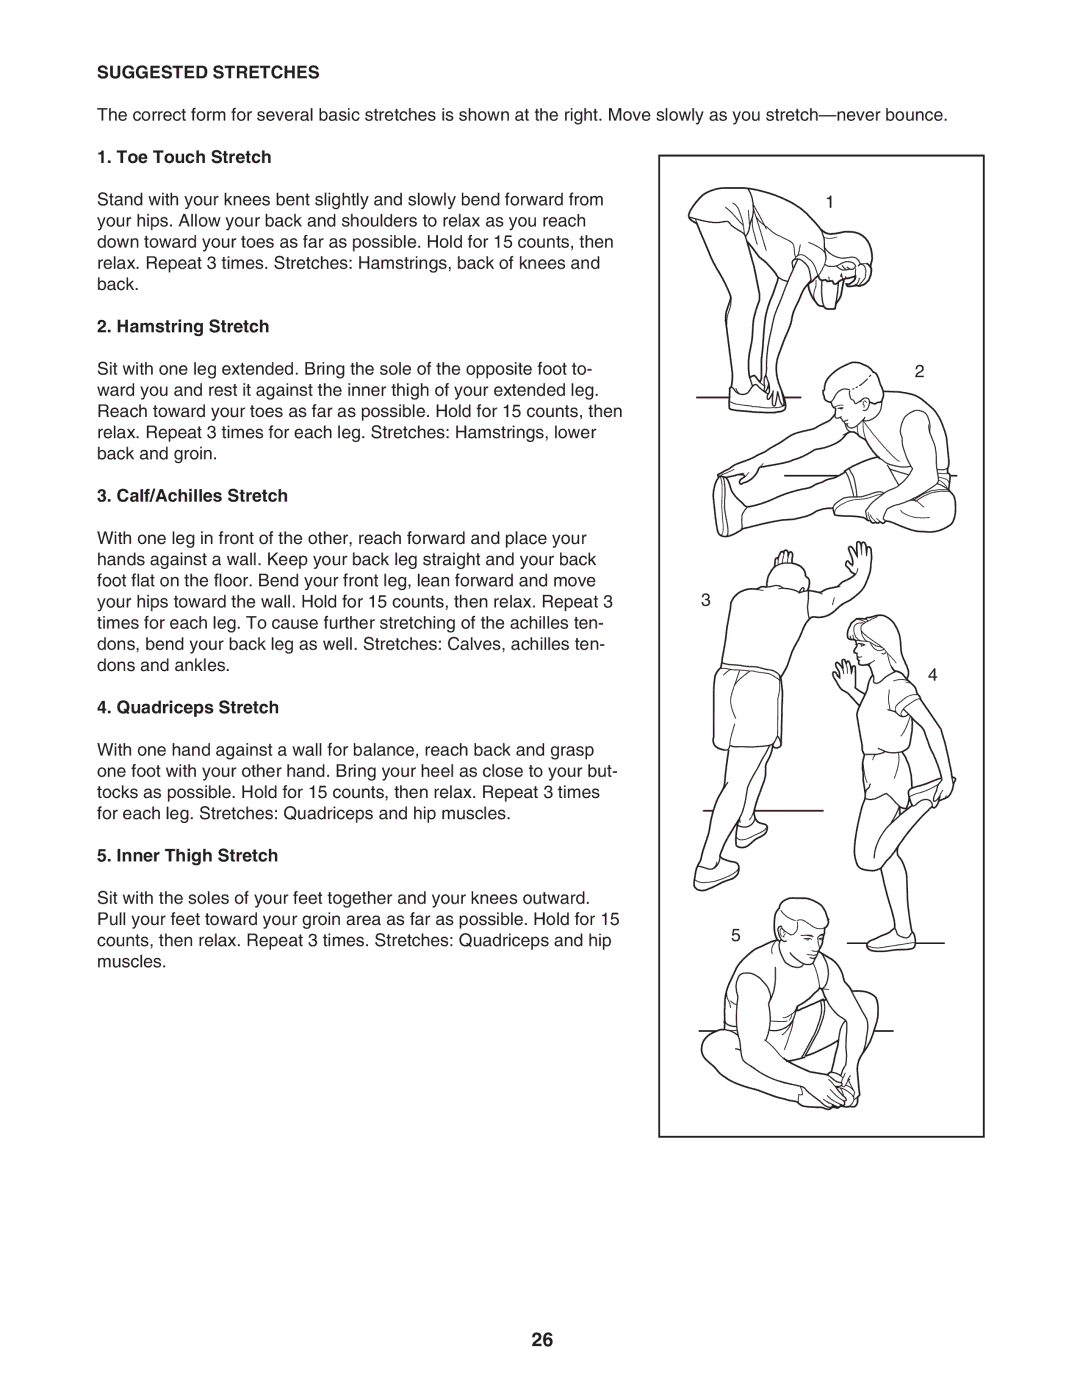 ProForm DTL42941 user manual Suggested Stretches 